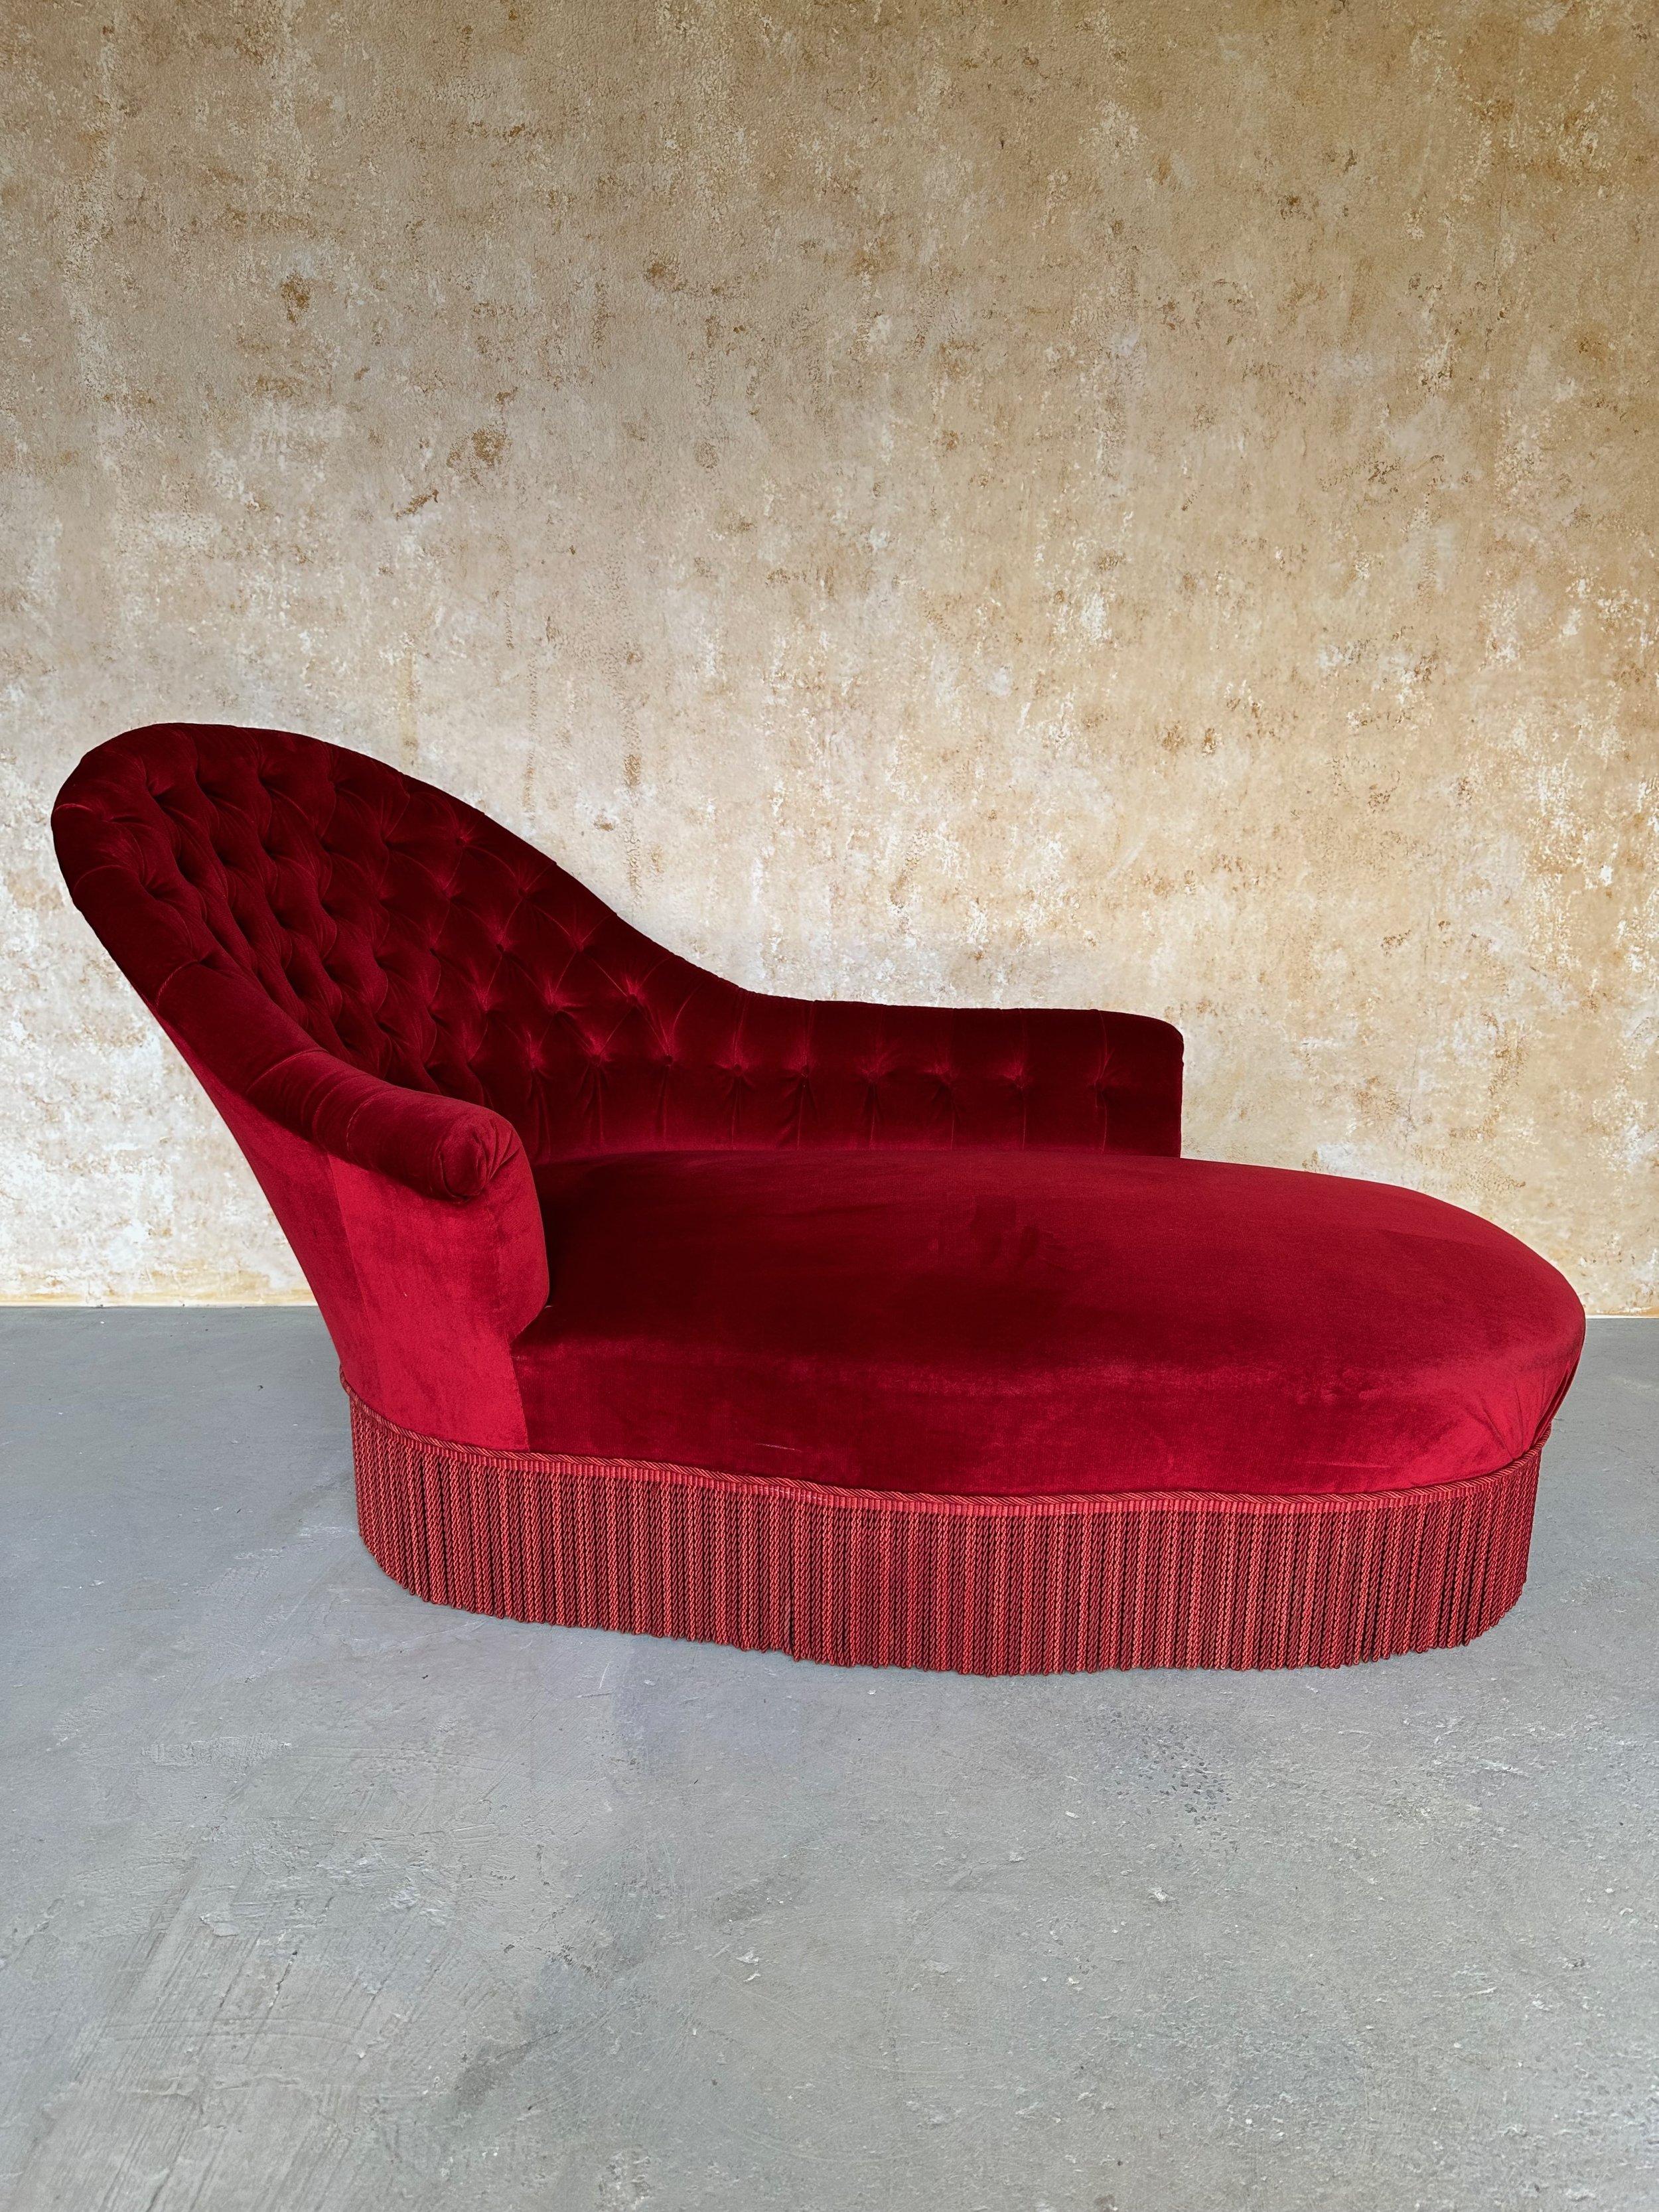 This exquisite French 19th century Napoleon III chaise lounge features an extended left arm, and the interior of the back and arms have skillfully ironed diamond tufting, making this chaise a unique and standout addition to any interior. Upholstered